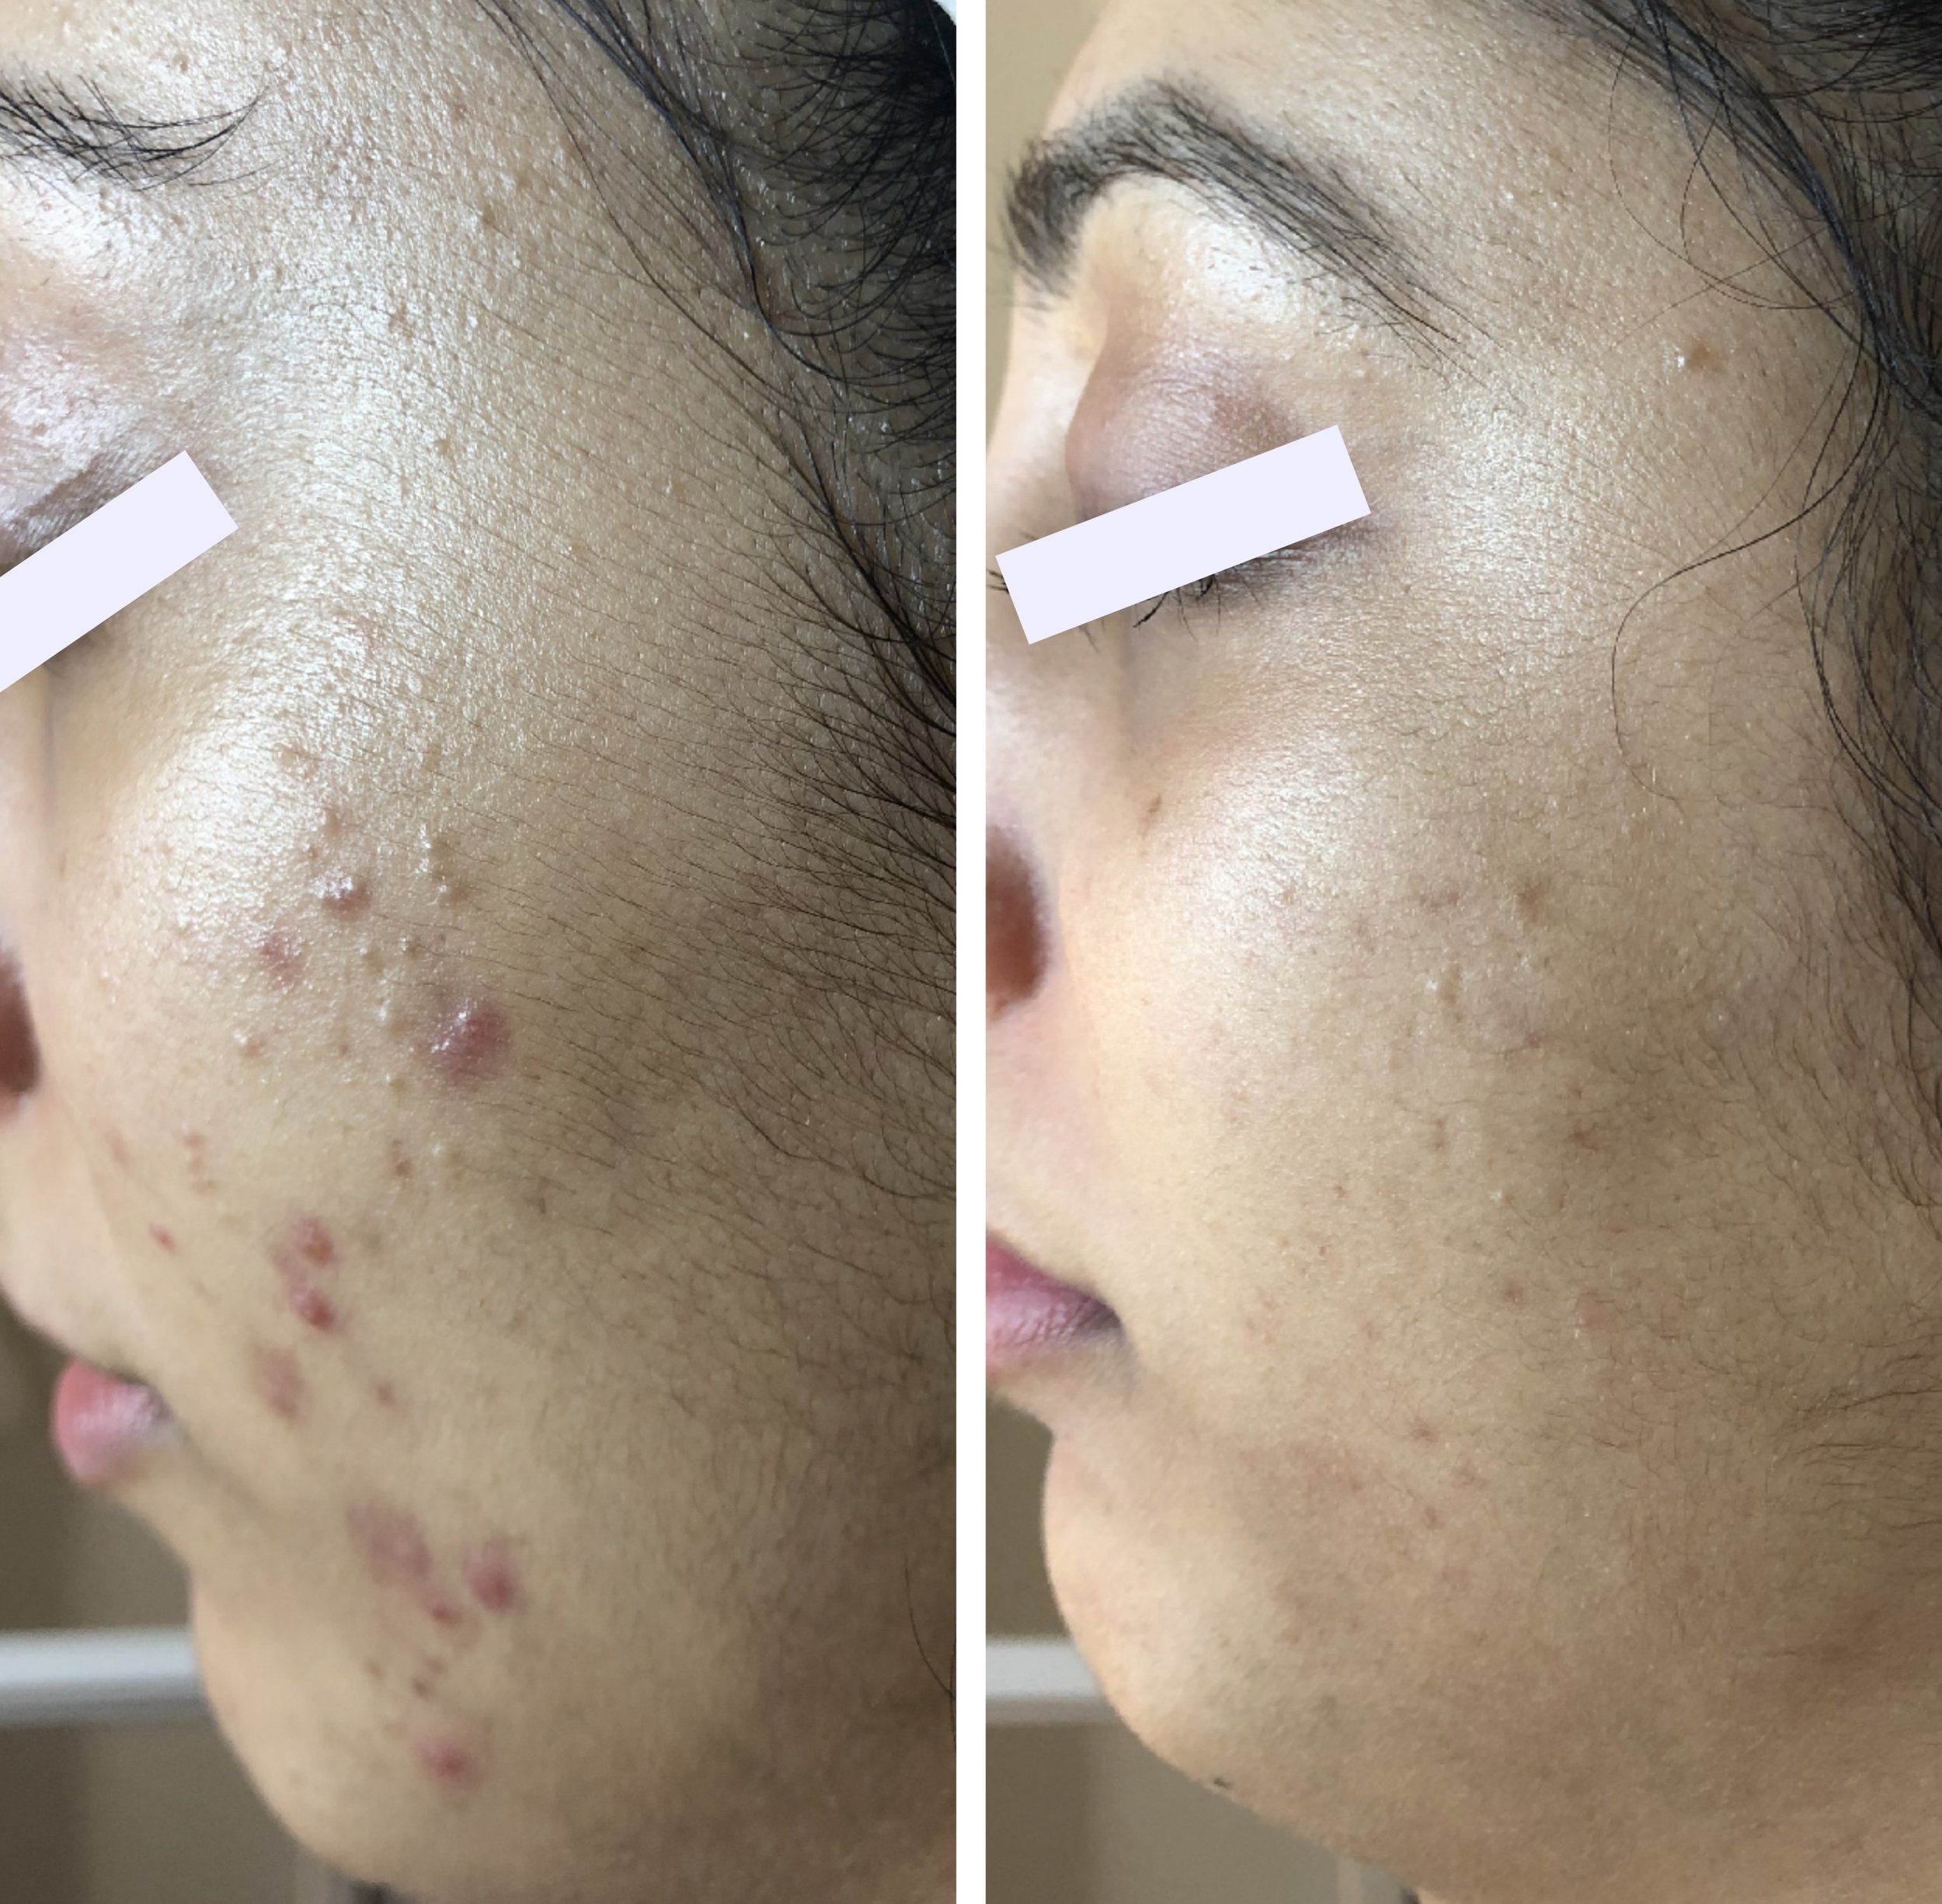  cystic acne cleared following a series of 12 step hi-tech facials 